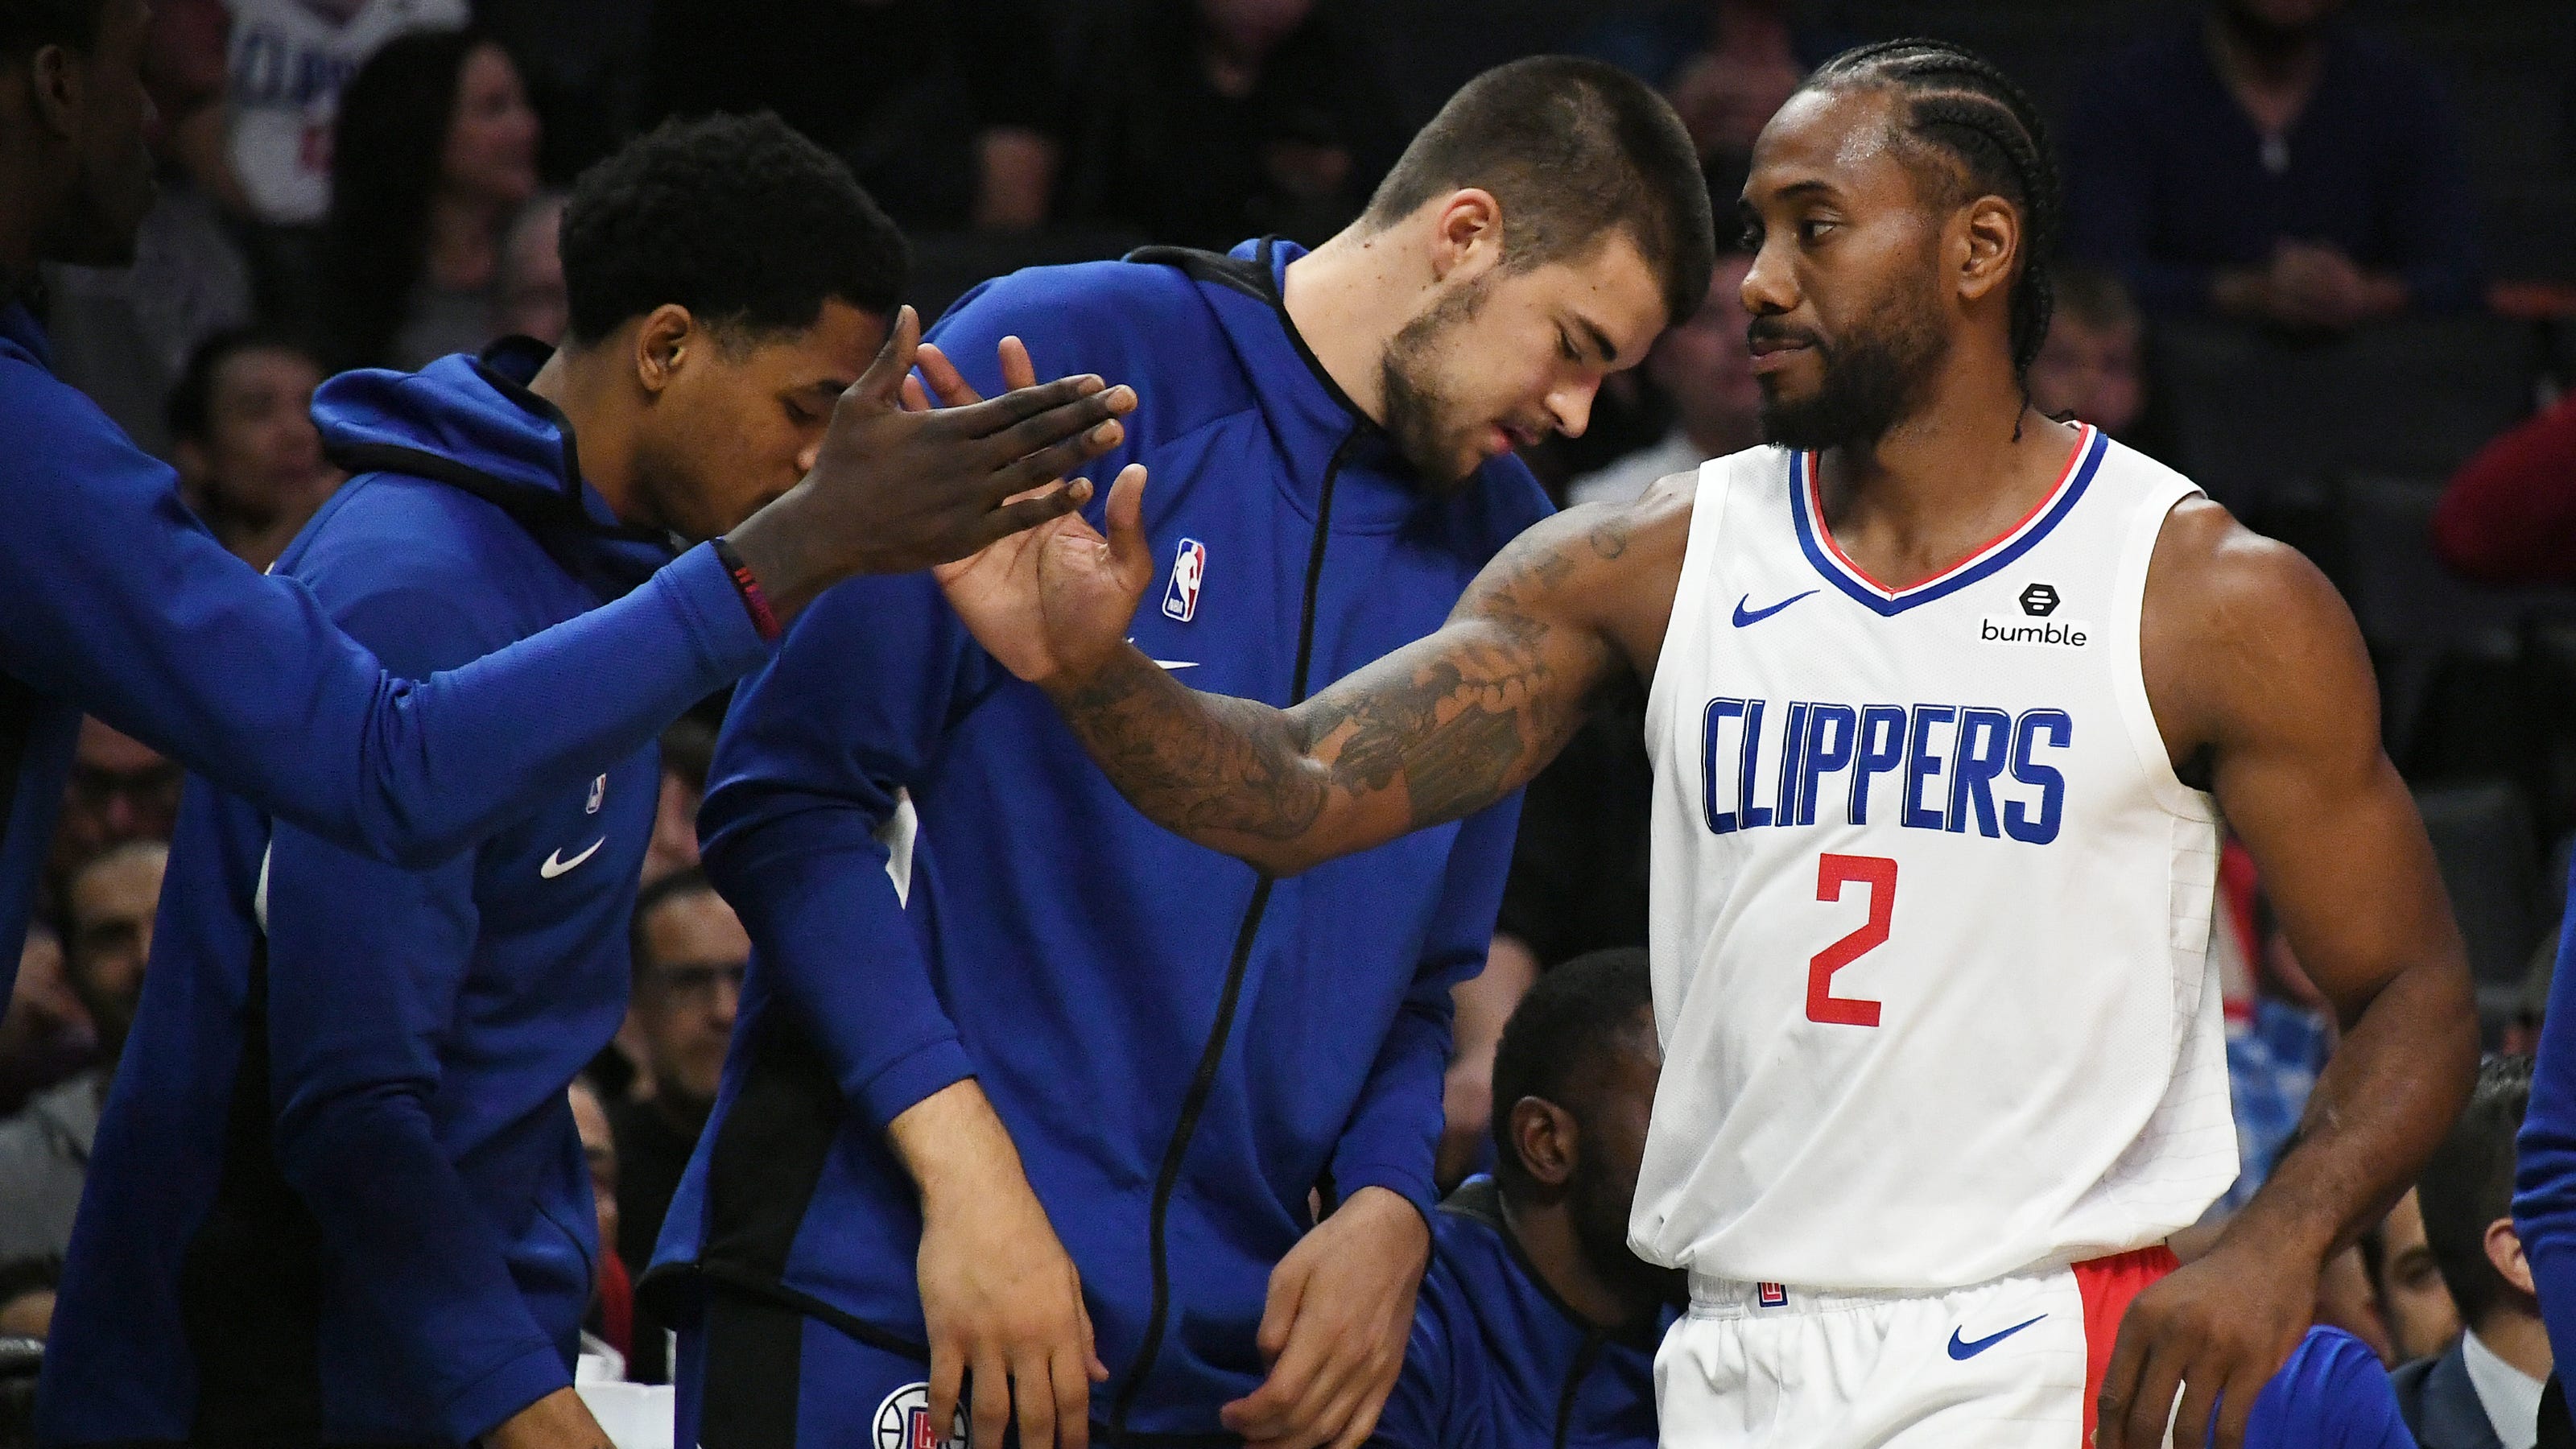 Kawhi Leonard's Clippers debut leaves NBA fans wanting more